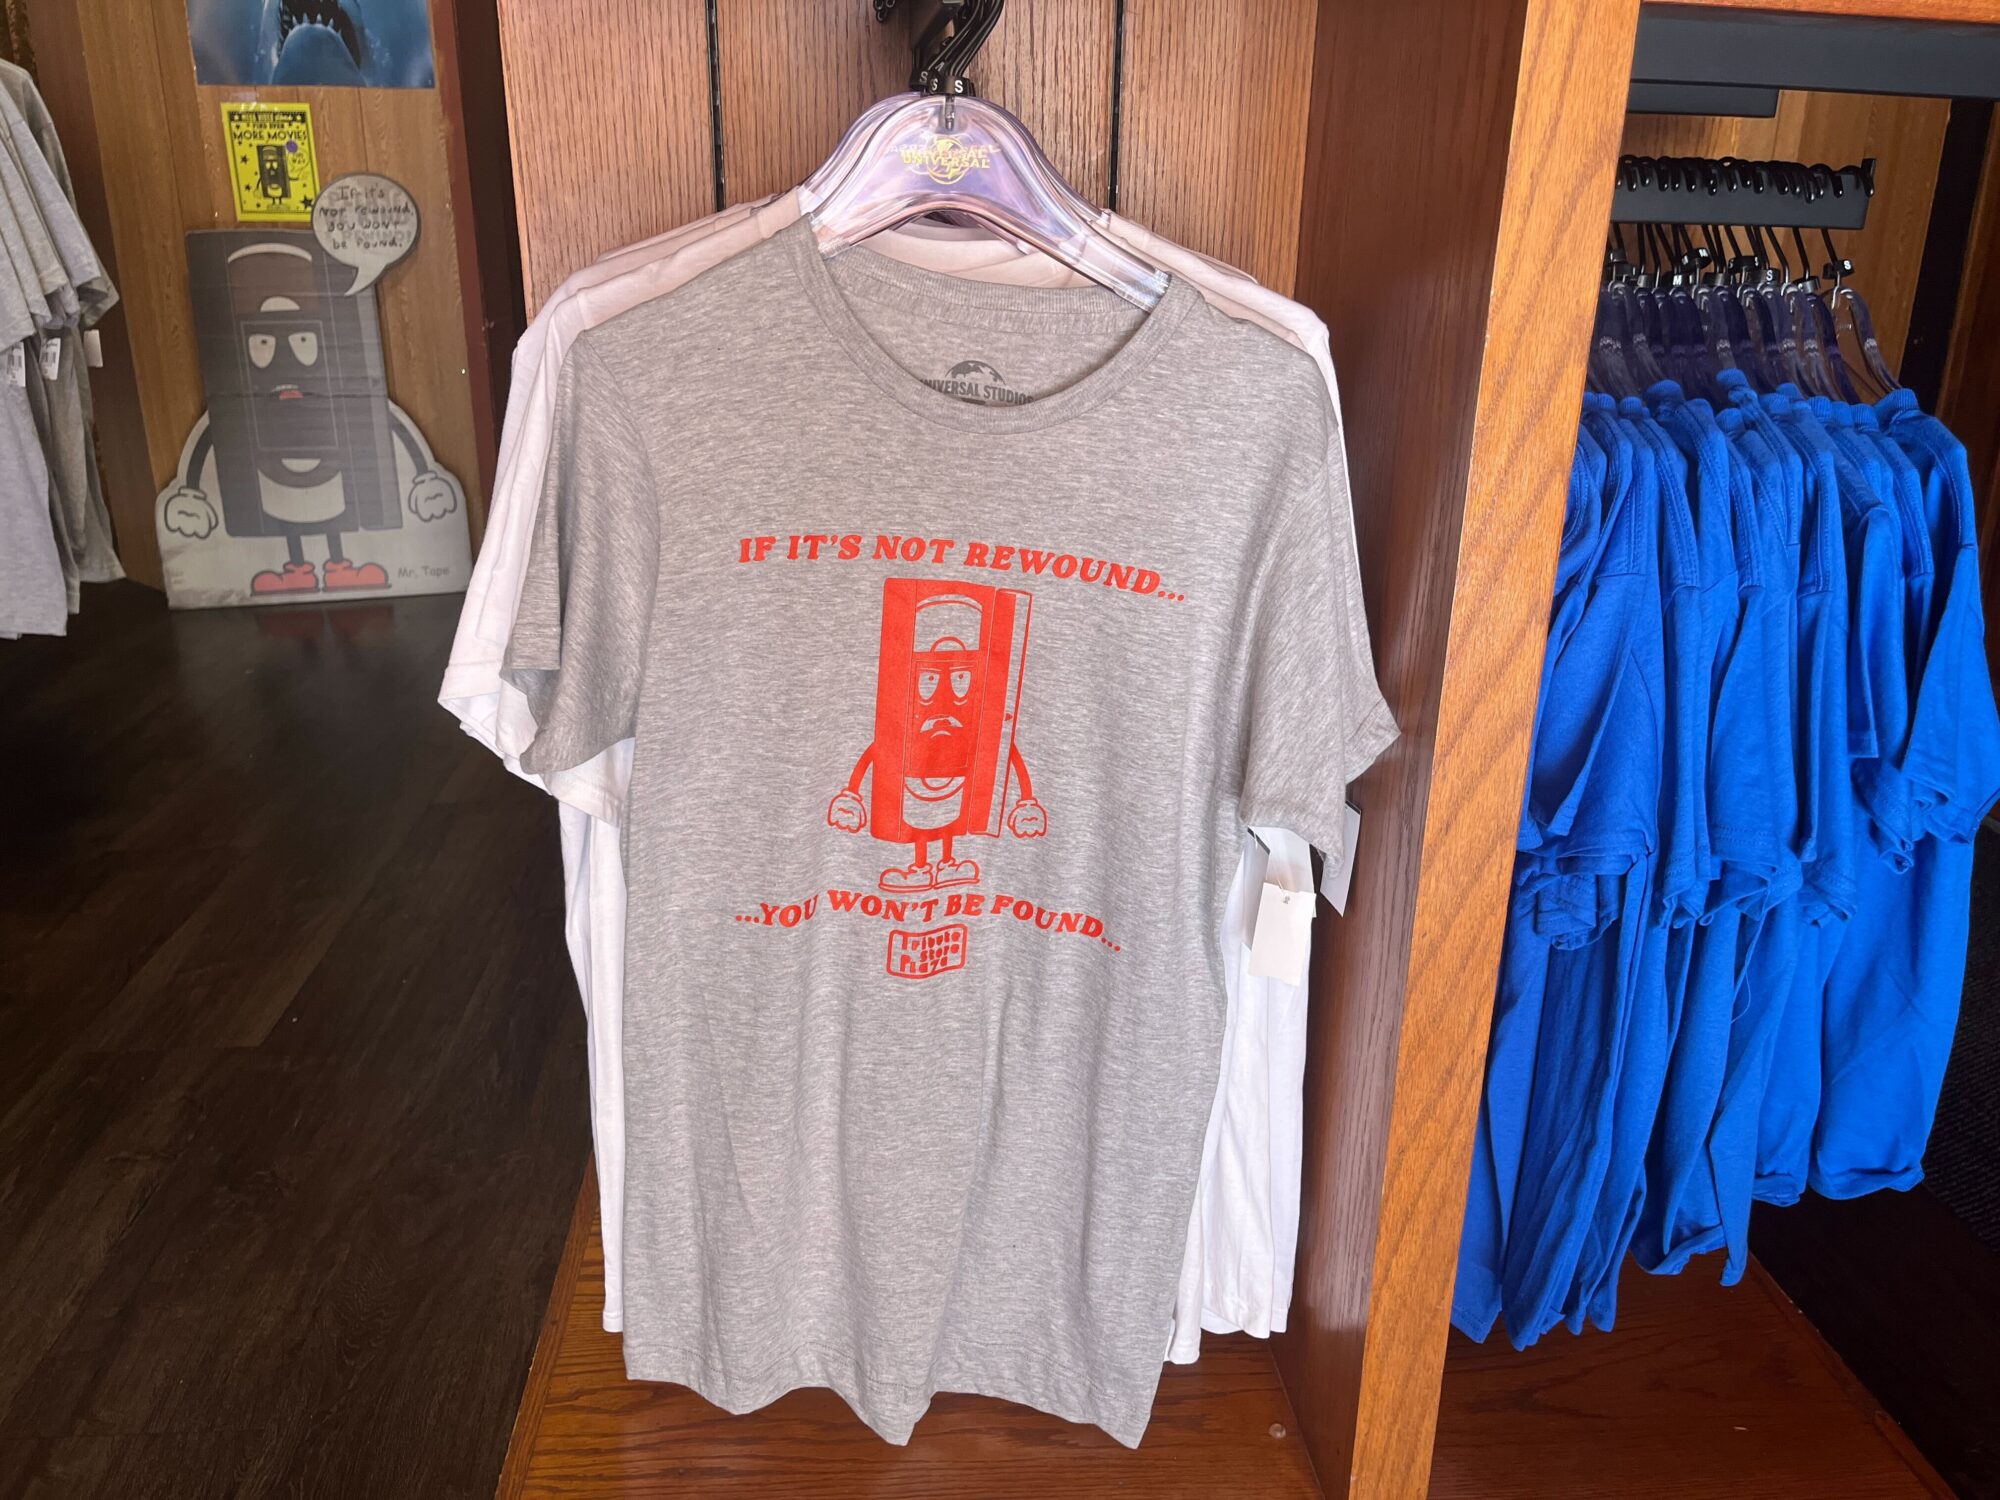 New Mr. Tape T-Shirt Warns of the Consequences of Not Rewinding at Universal Studios Florida